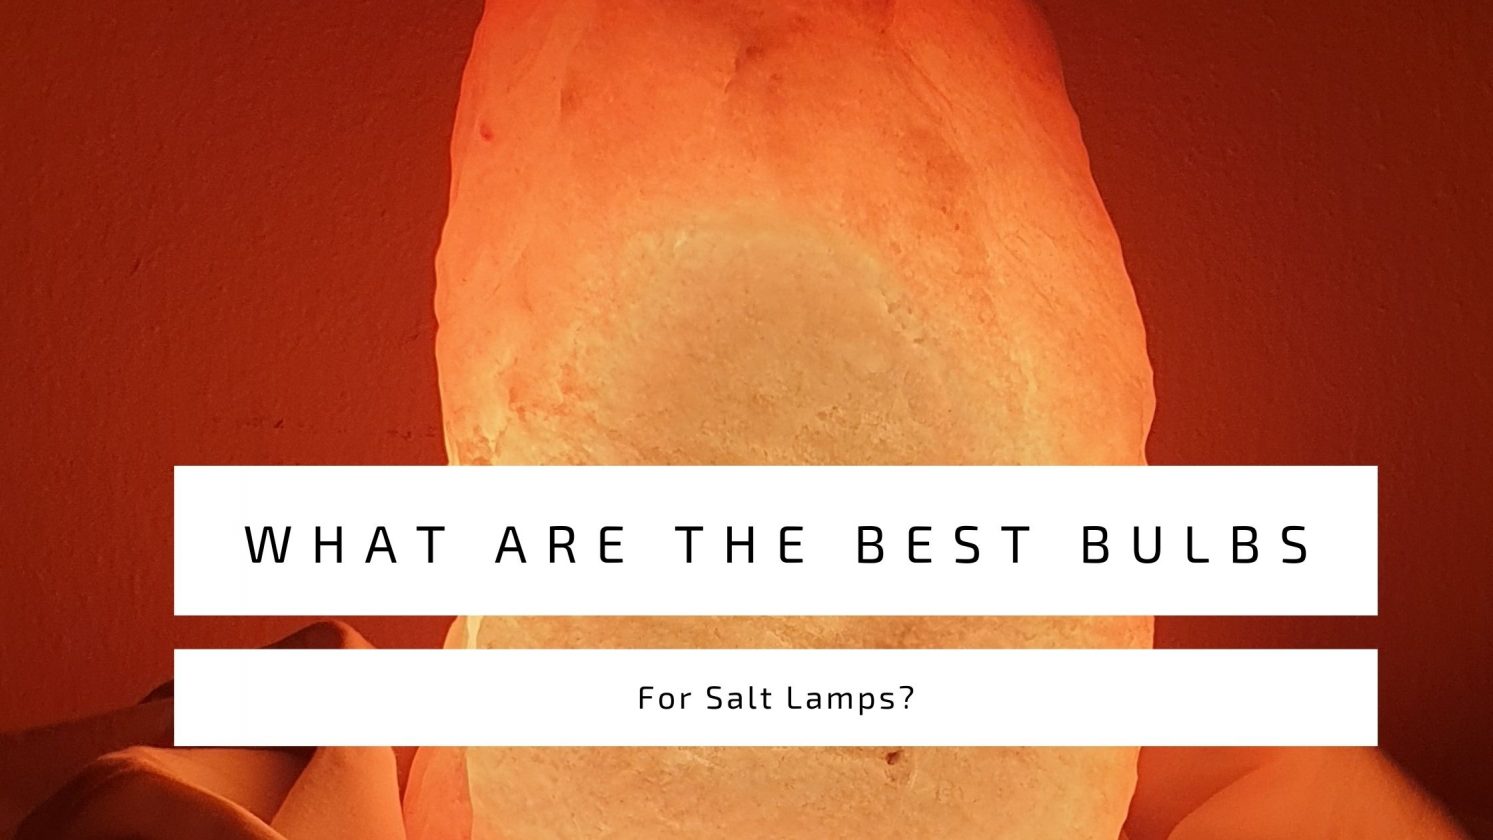 What Are The Best Bulbs For Salt Lamps?